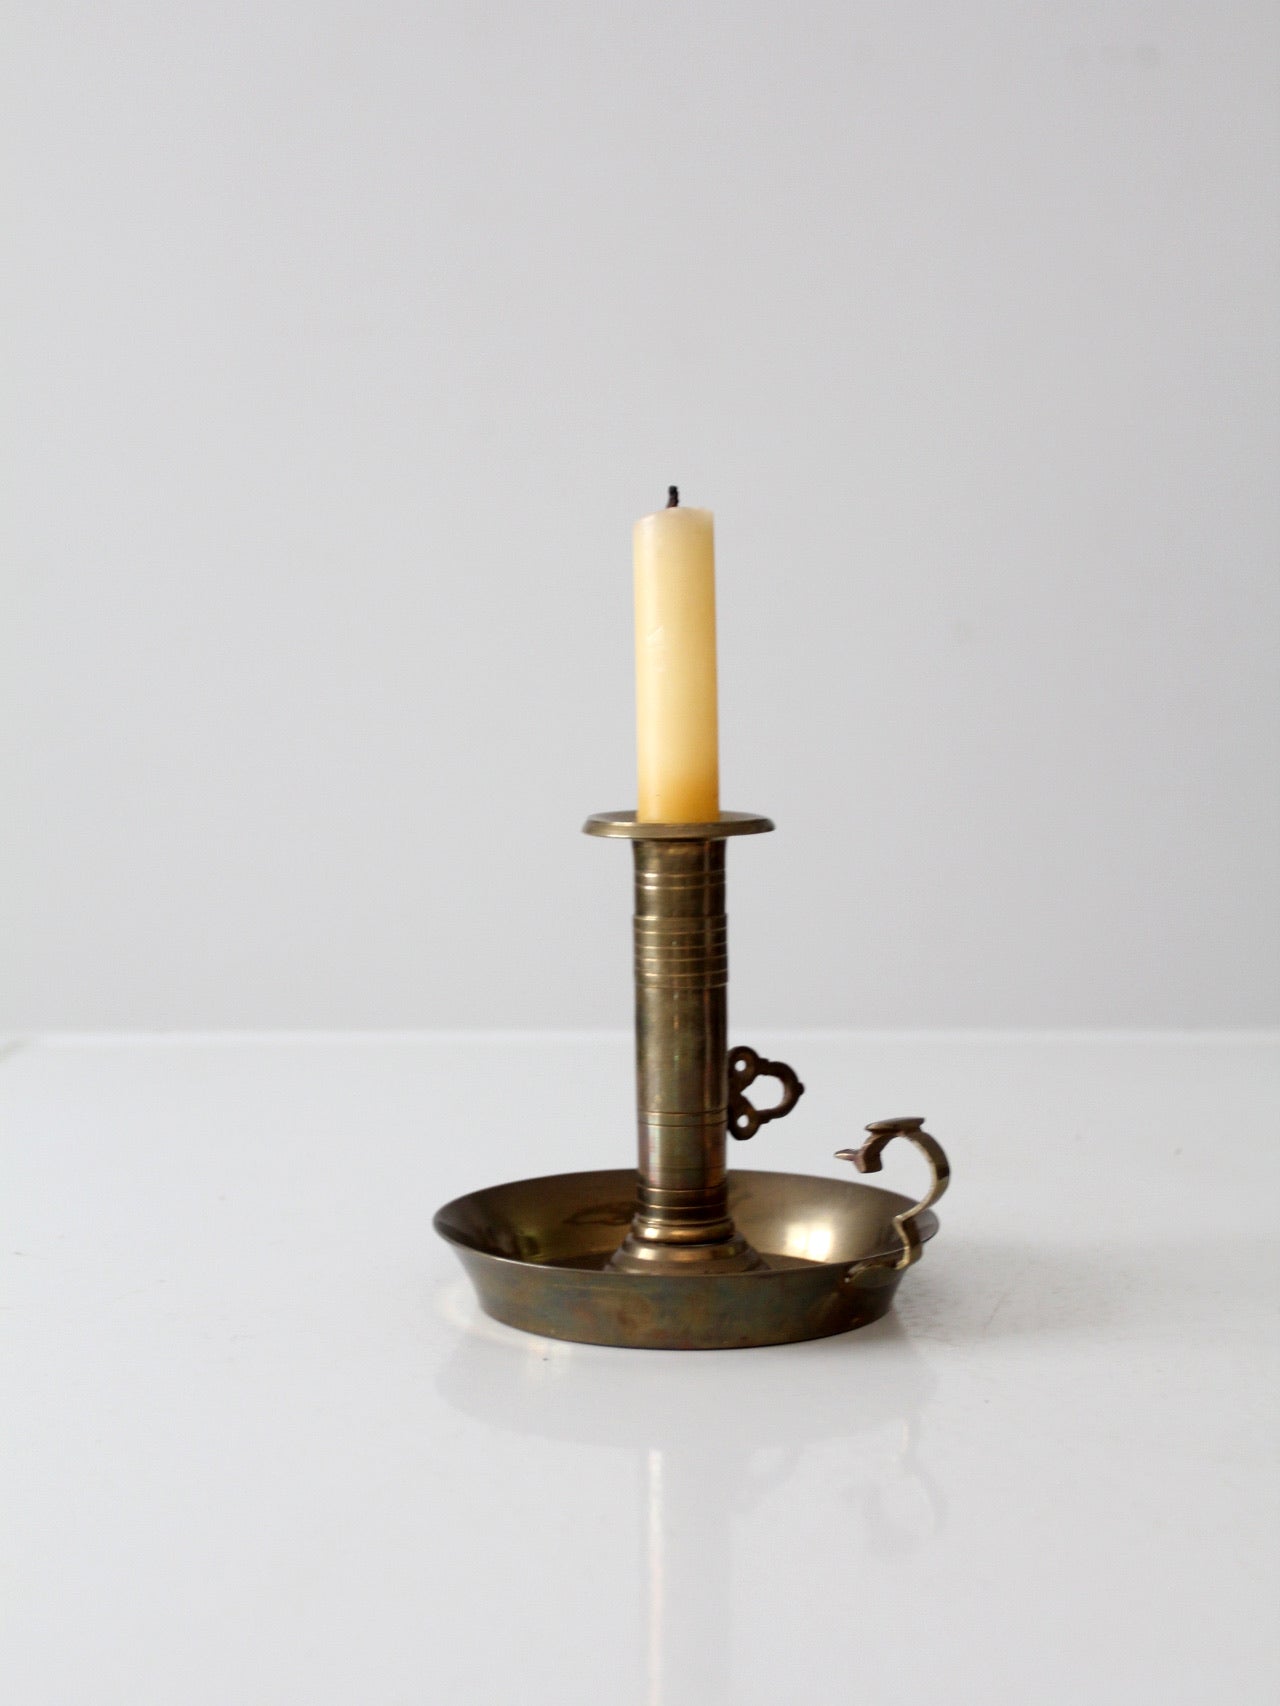 Chamberstick Candle Holder Vintage